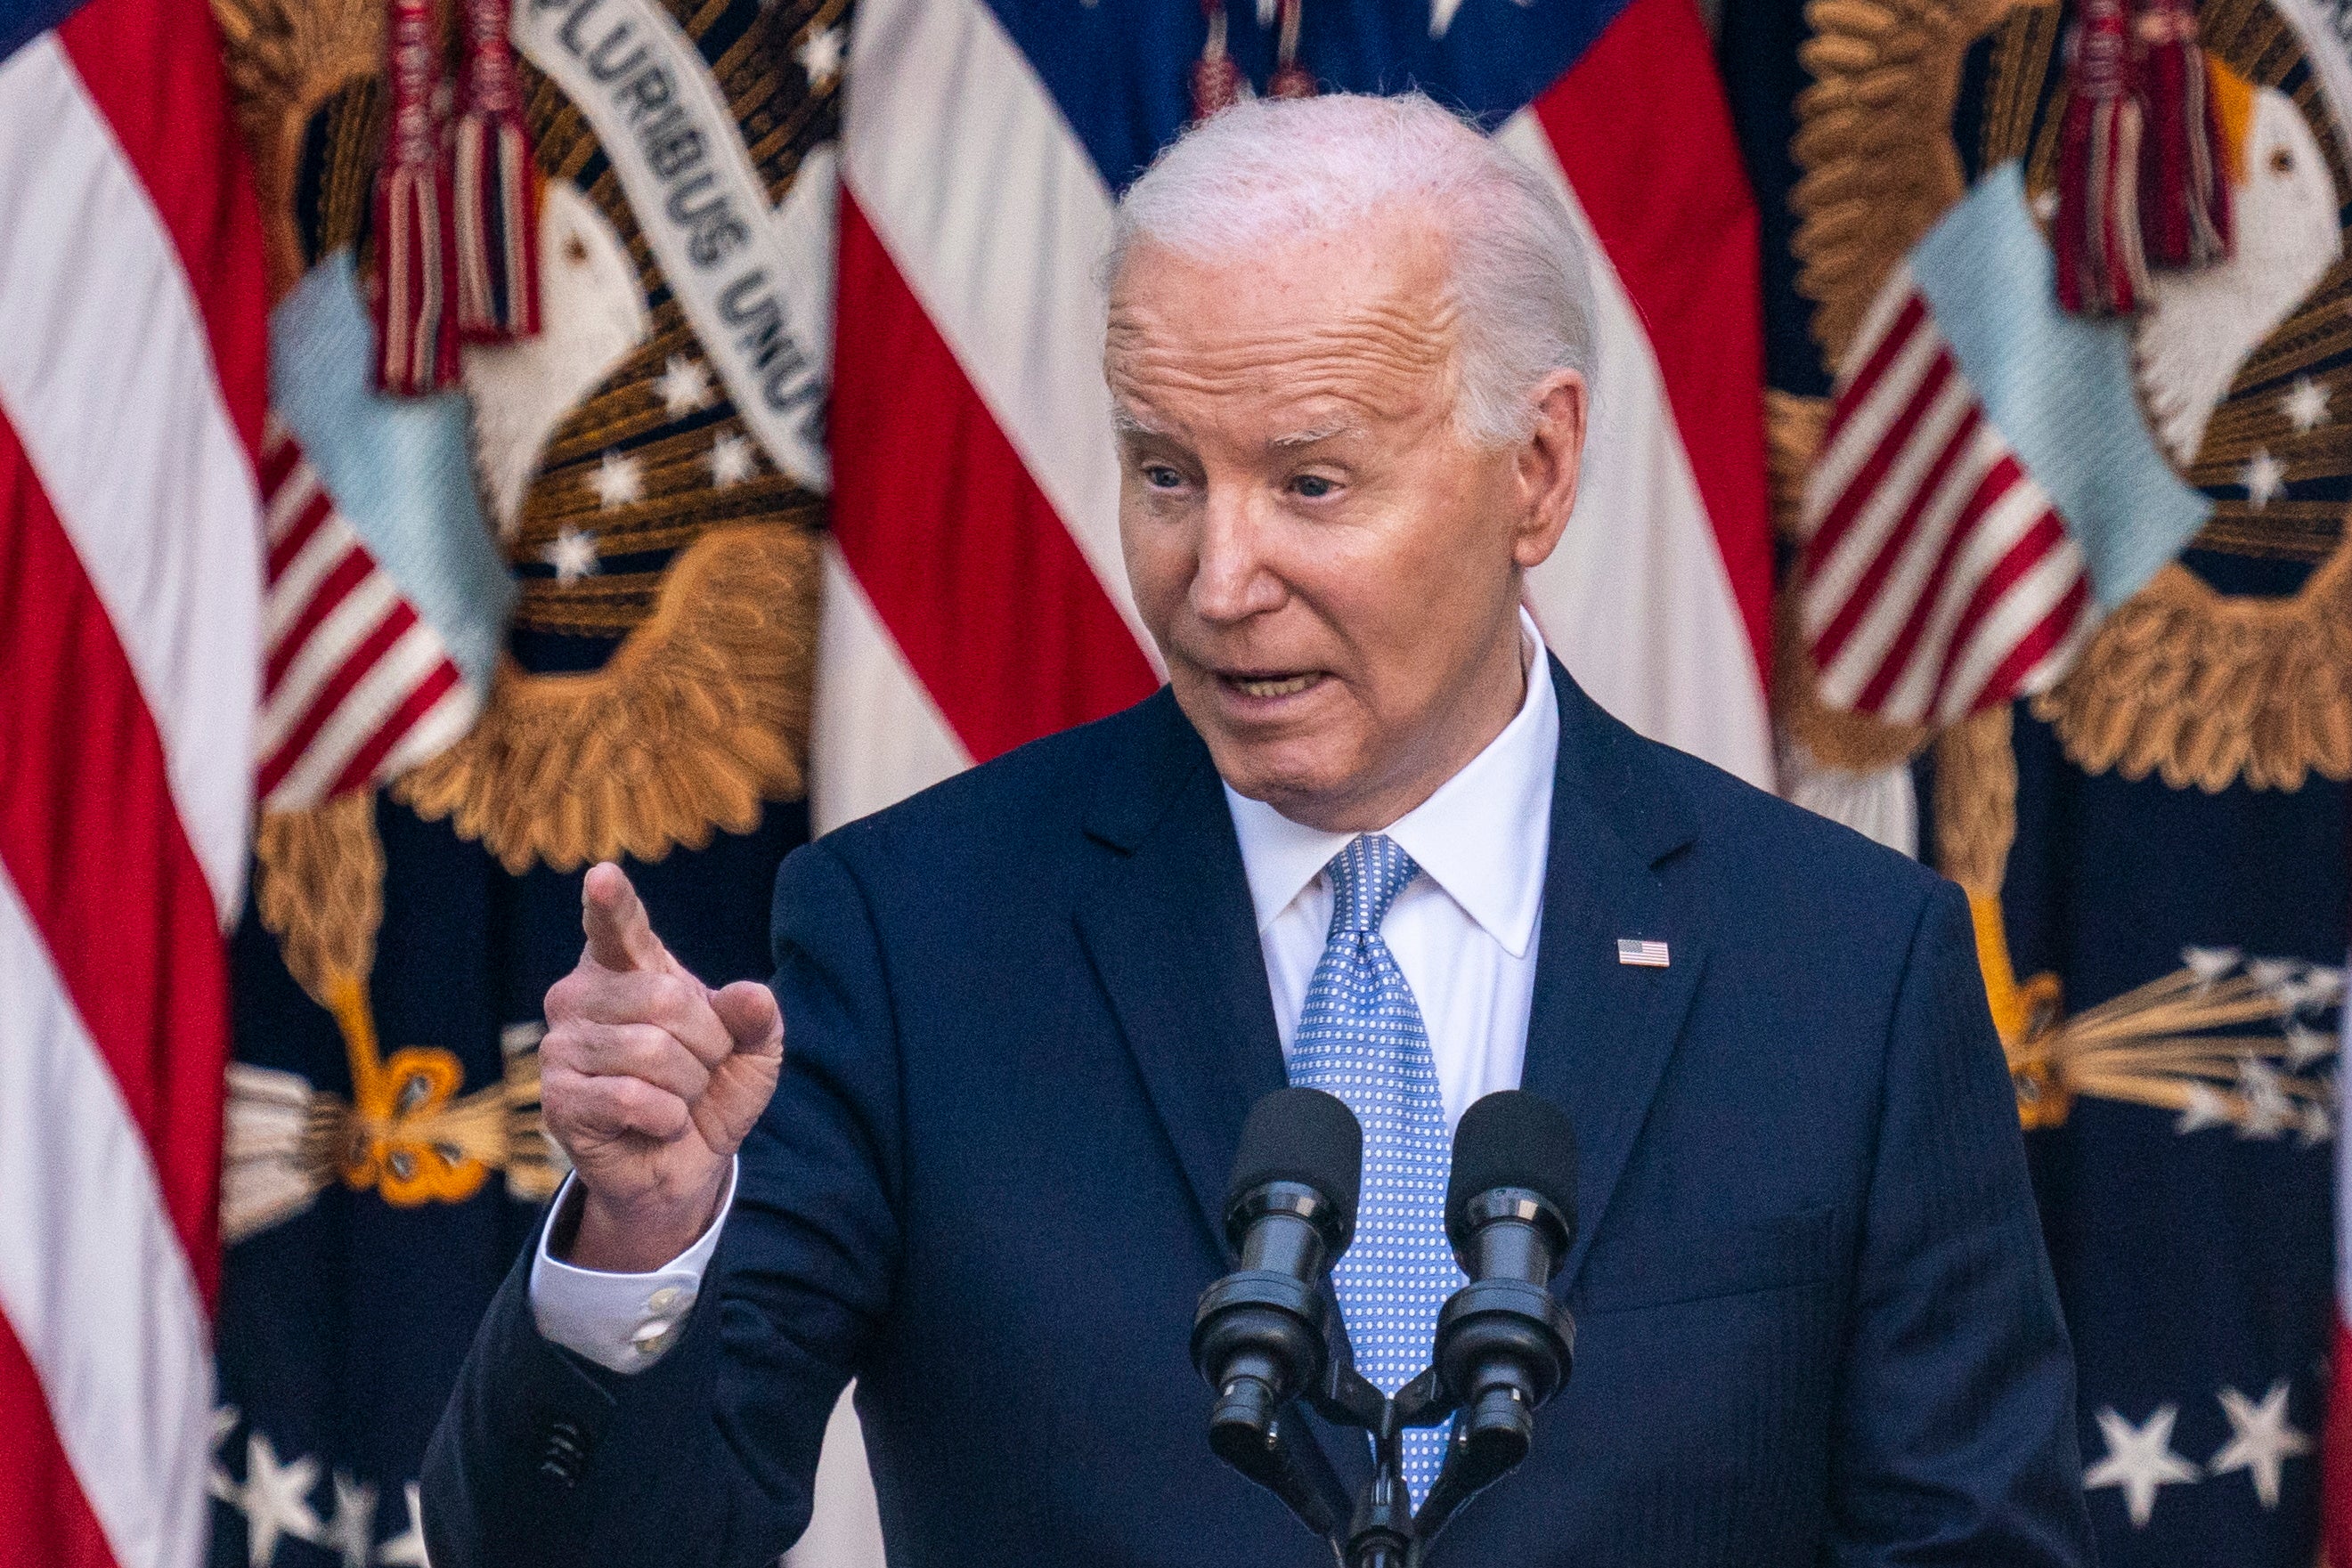 Joe Biden delivers remarks for Jewish American Heritage Month at the White House on 20 May